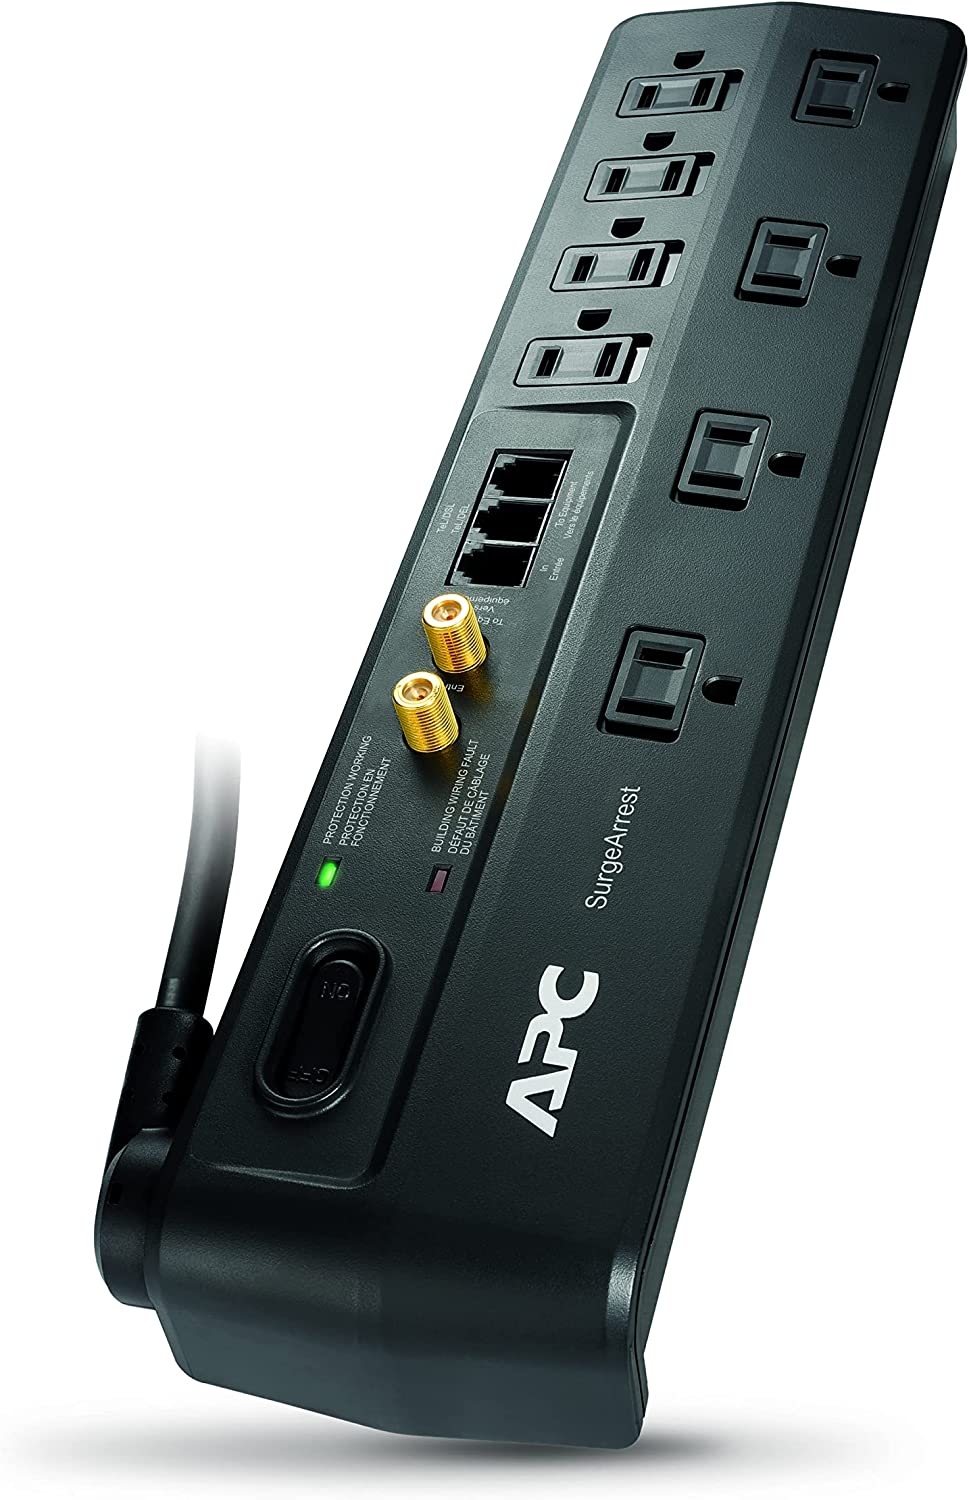 APC Surge Protector with Telephone, DSL and Coaxial Protection, P8VT3, 2770 Joules, 8 Outlet Surge Protector Power Strip Gray 8 Outlet DSL / Tele + Coaxial Surge Protector